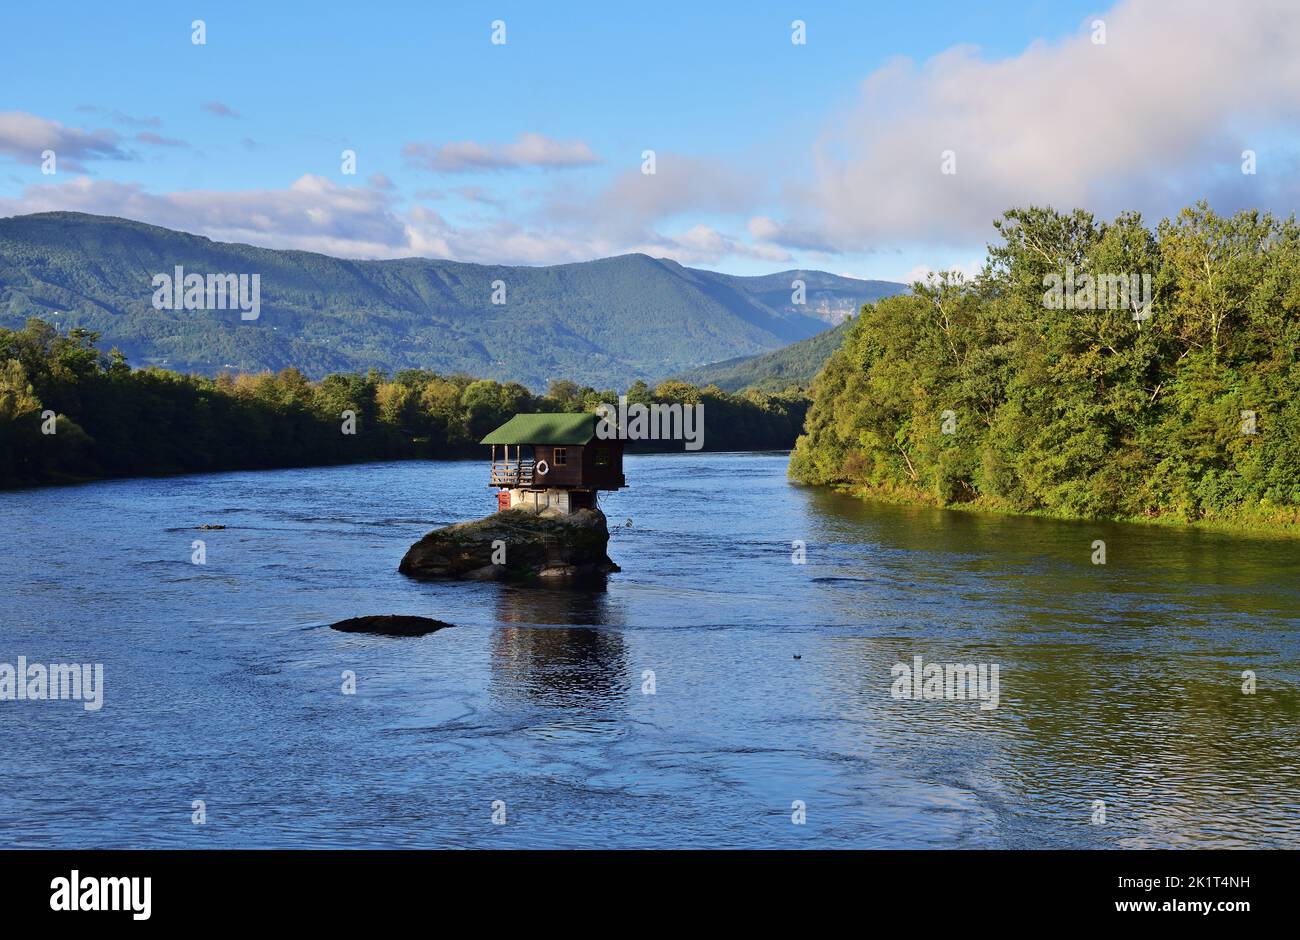 Iconic house on the Drina in the National Park Tara Stock Photo